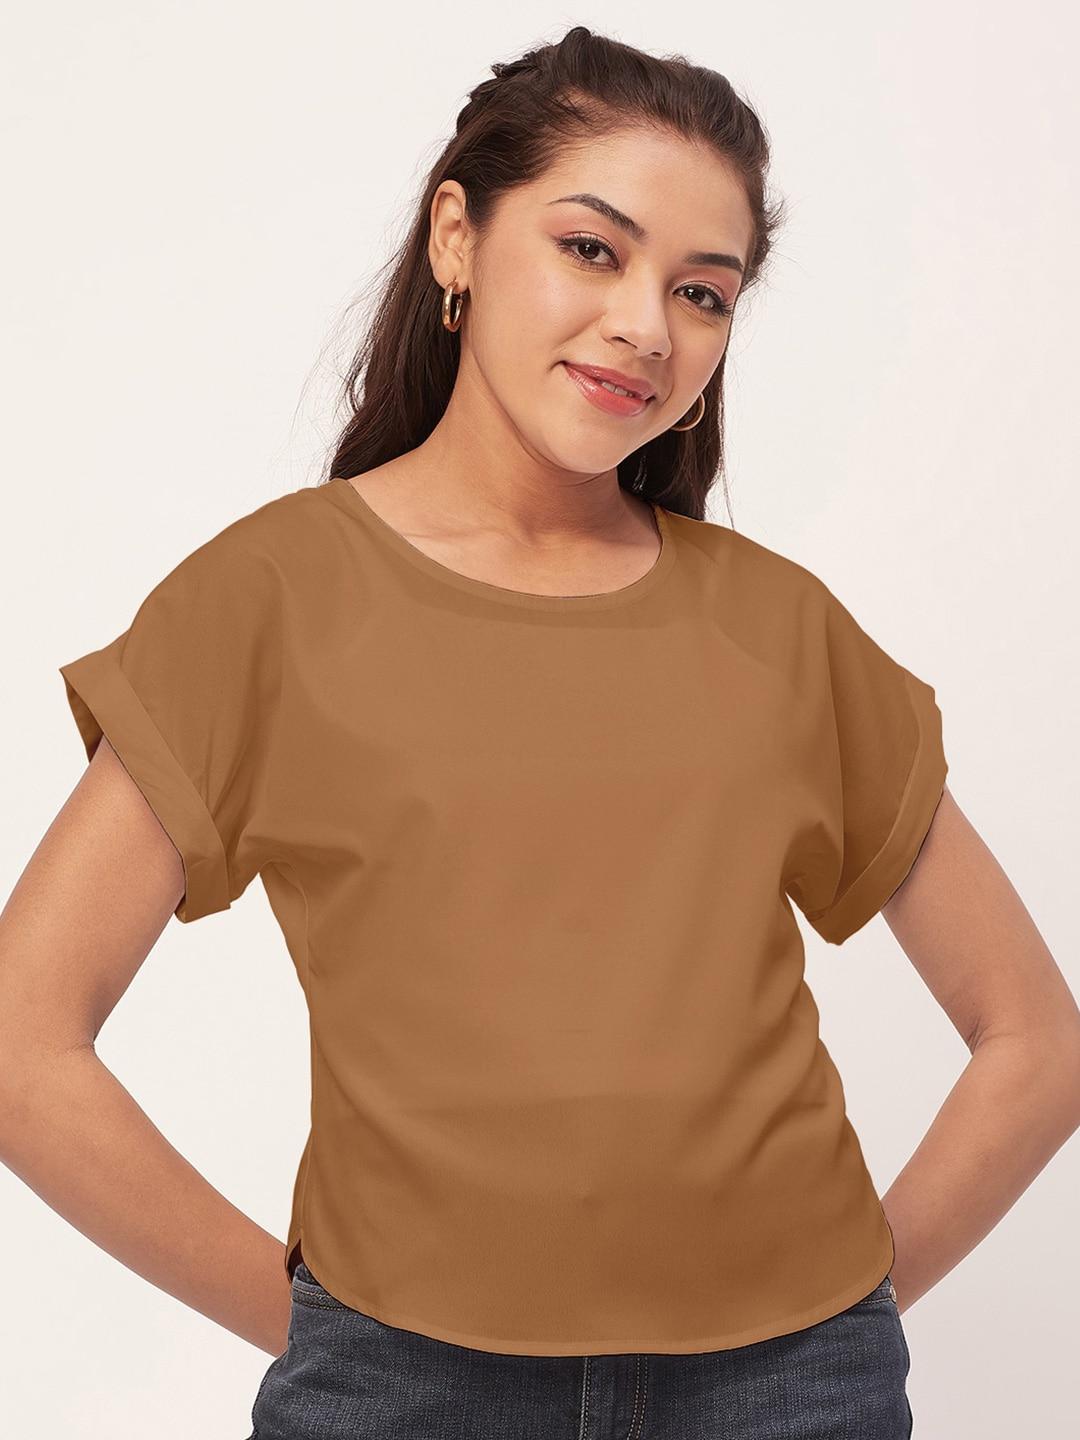 moomaya round neck extended sleeves casual top